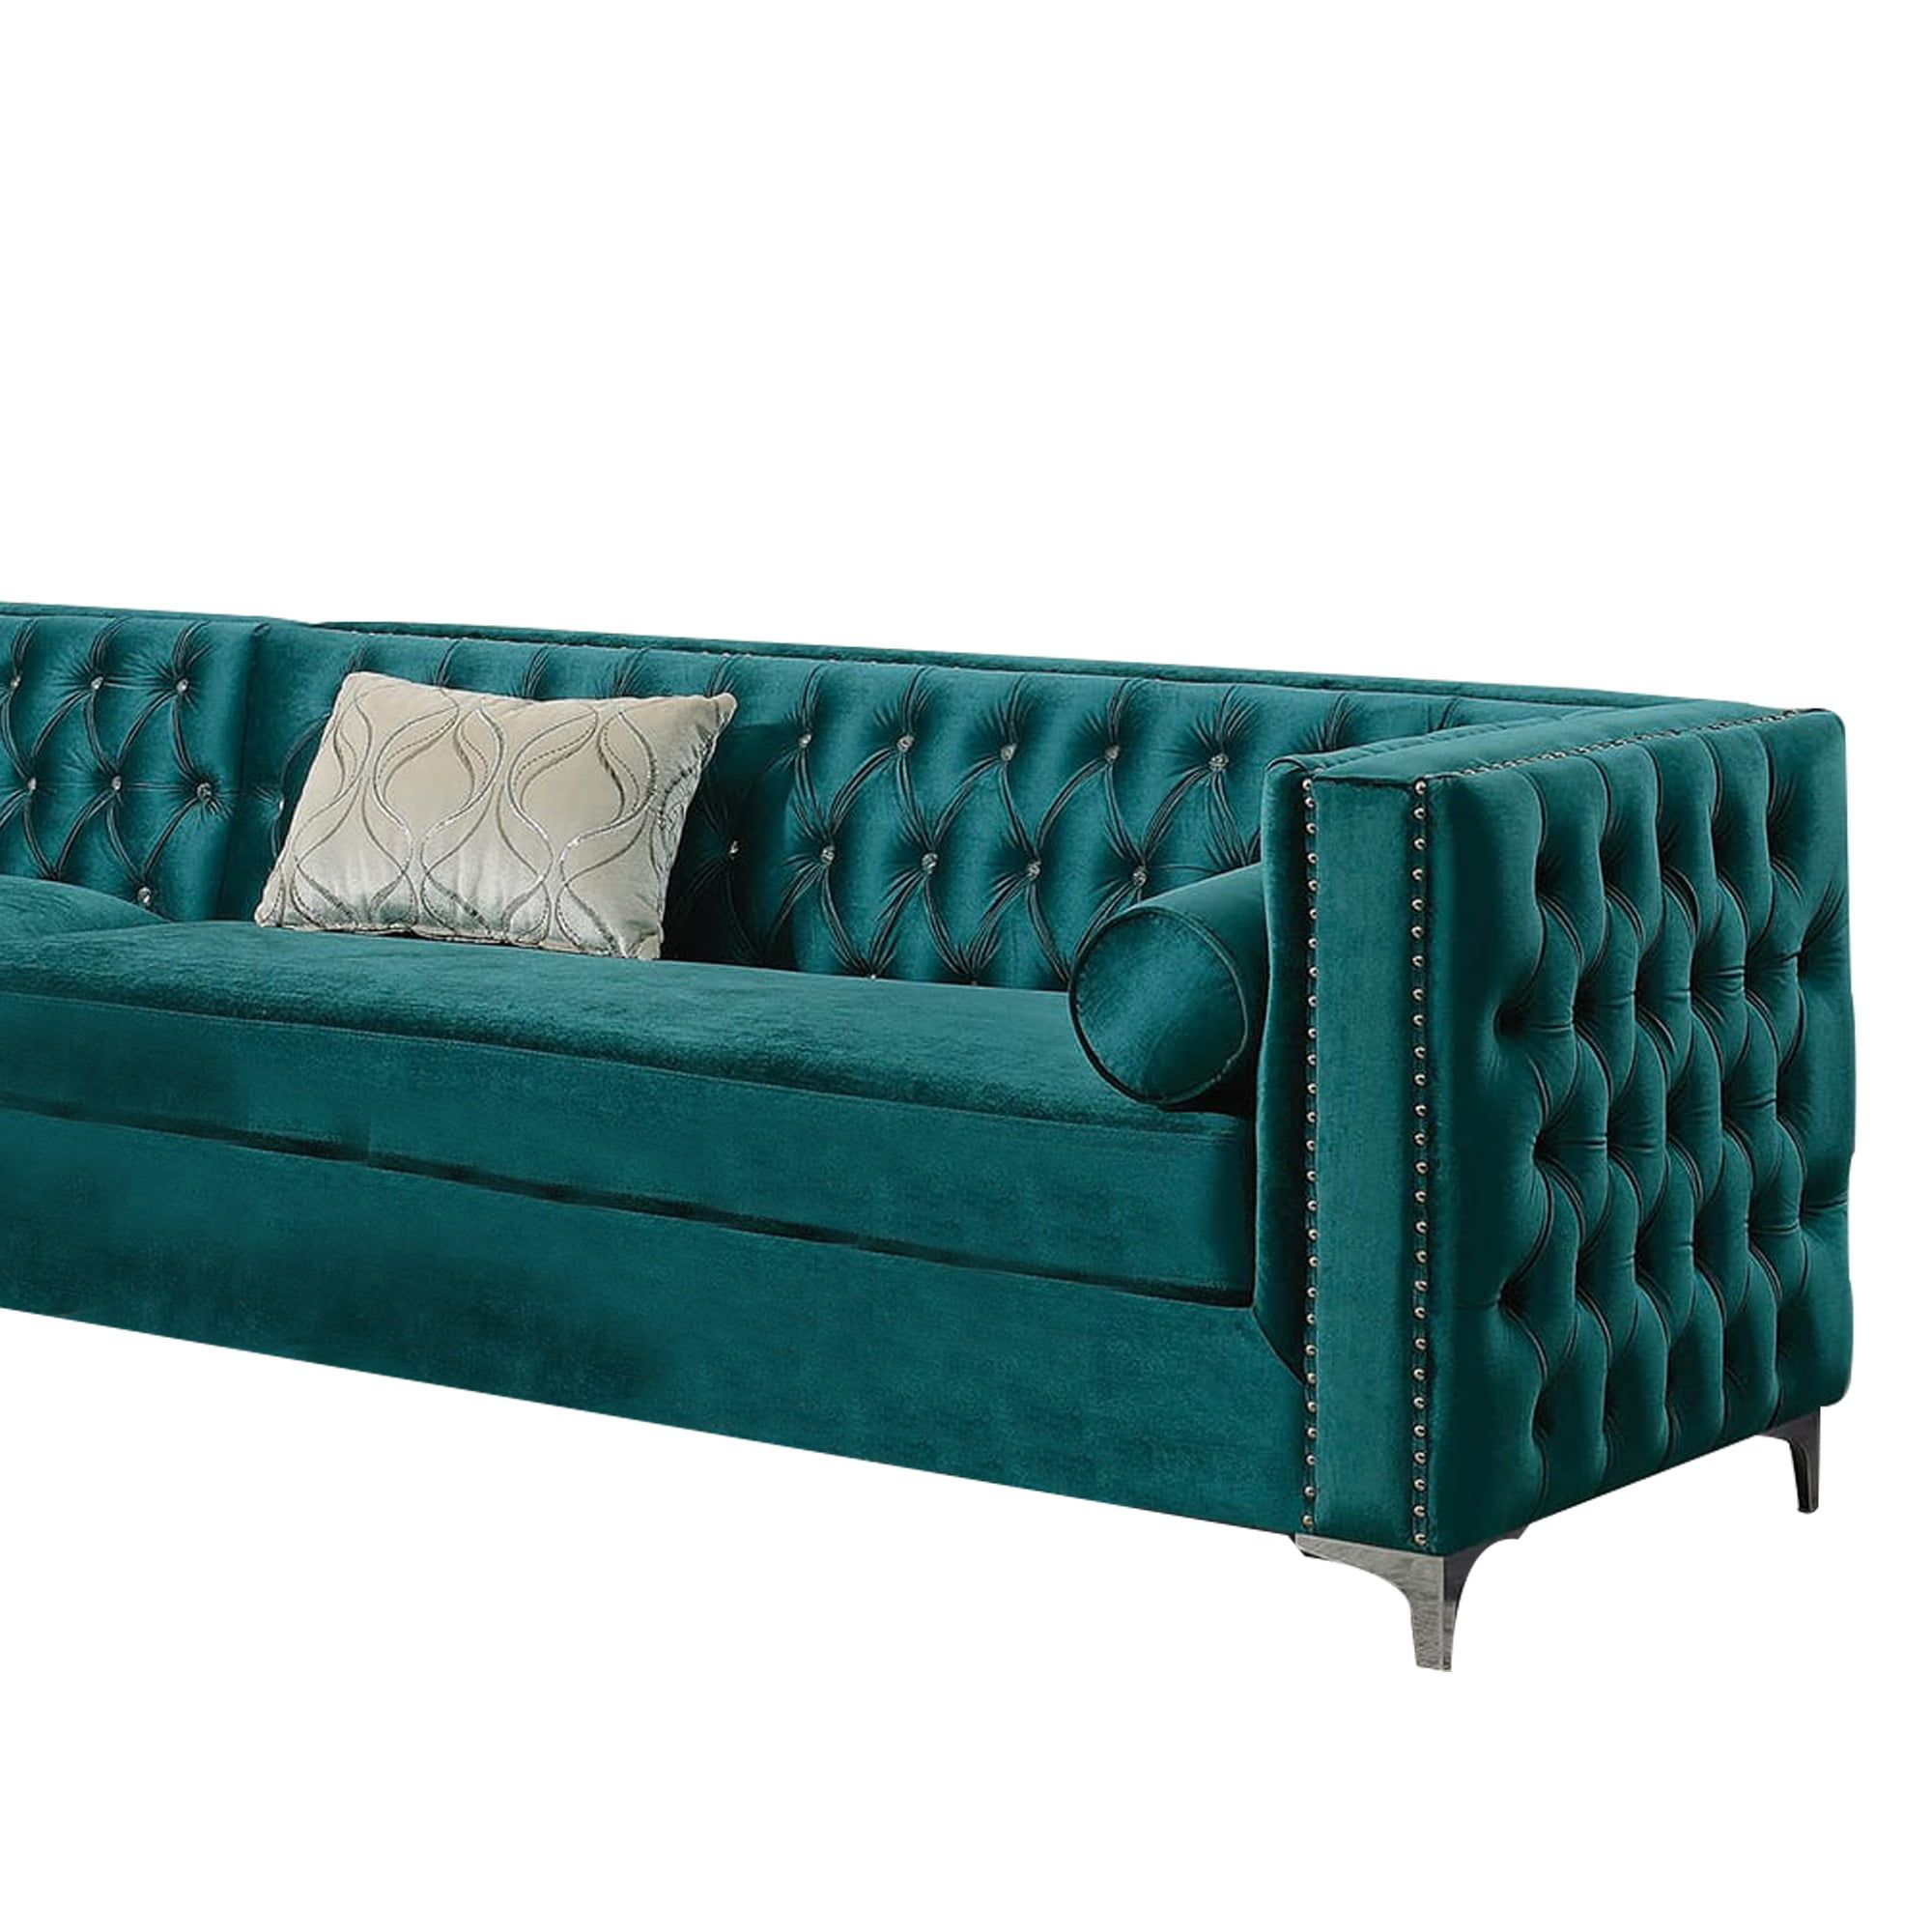 Velvet Upholstered 2 Piece Sectional Sofa With Tufted Details, Teal Pertaining To Tufted Upholstered Sofas (Gallery 17 of 20)